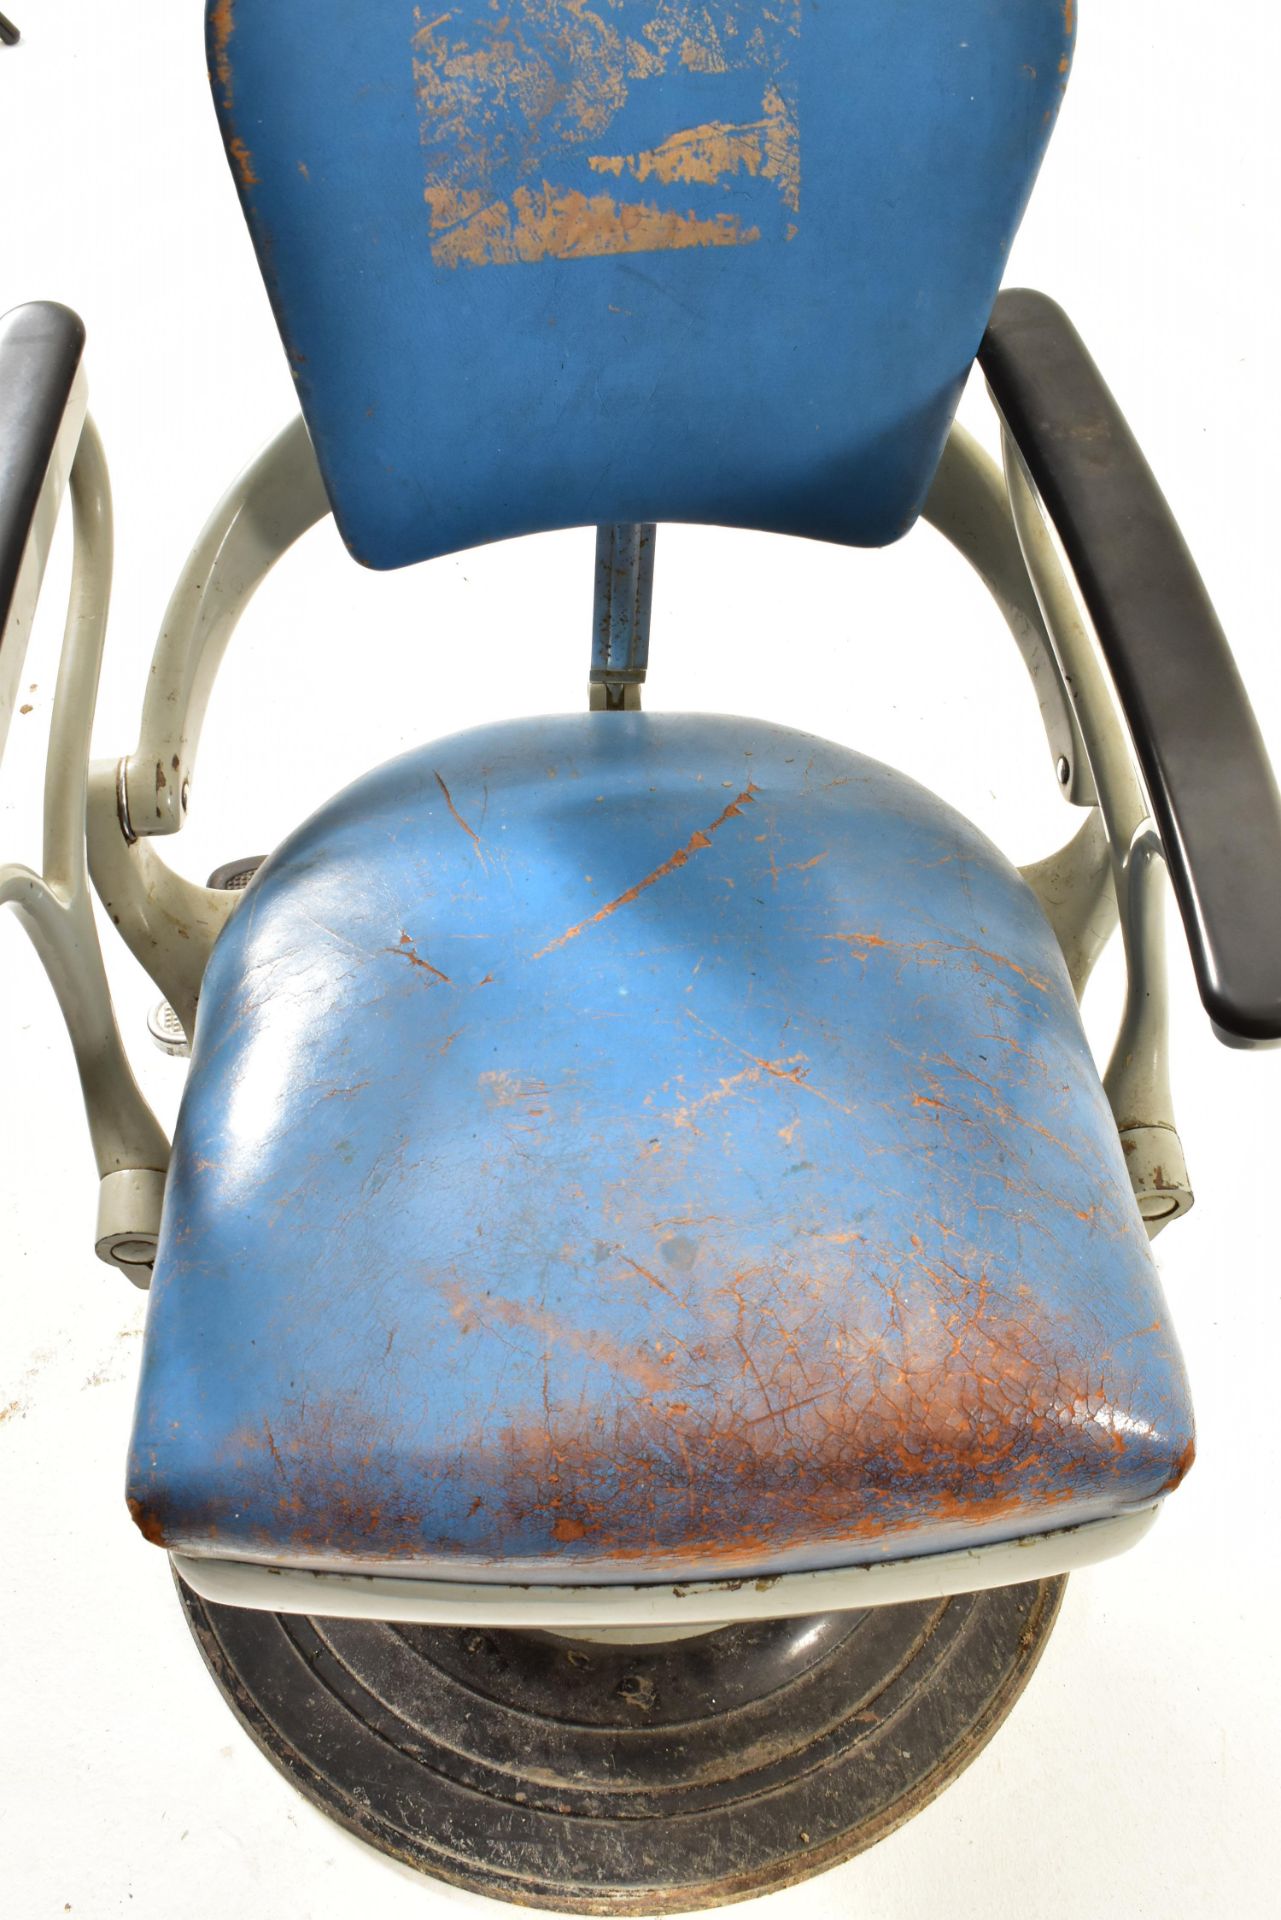 RITTER AG - MID CENTURY 1940S DENTIST ARTICULATED CHAIR - Image 7 of 8